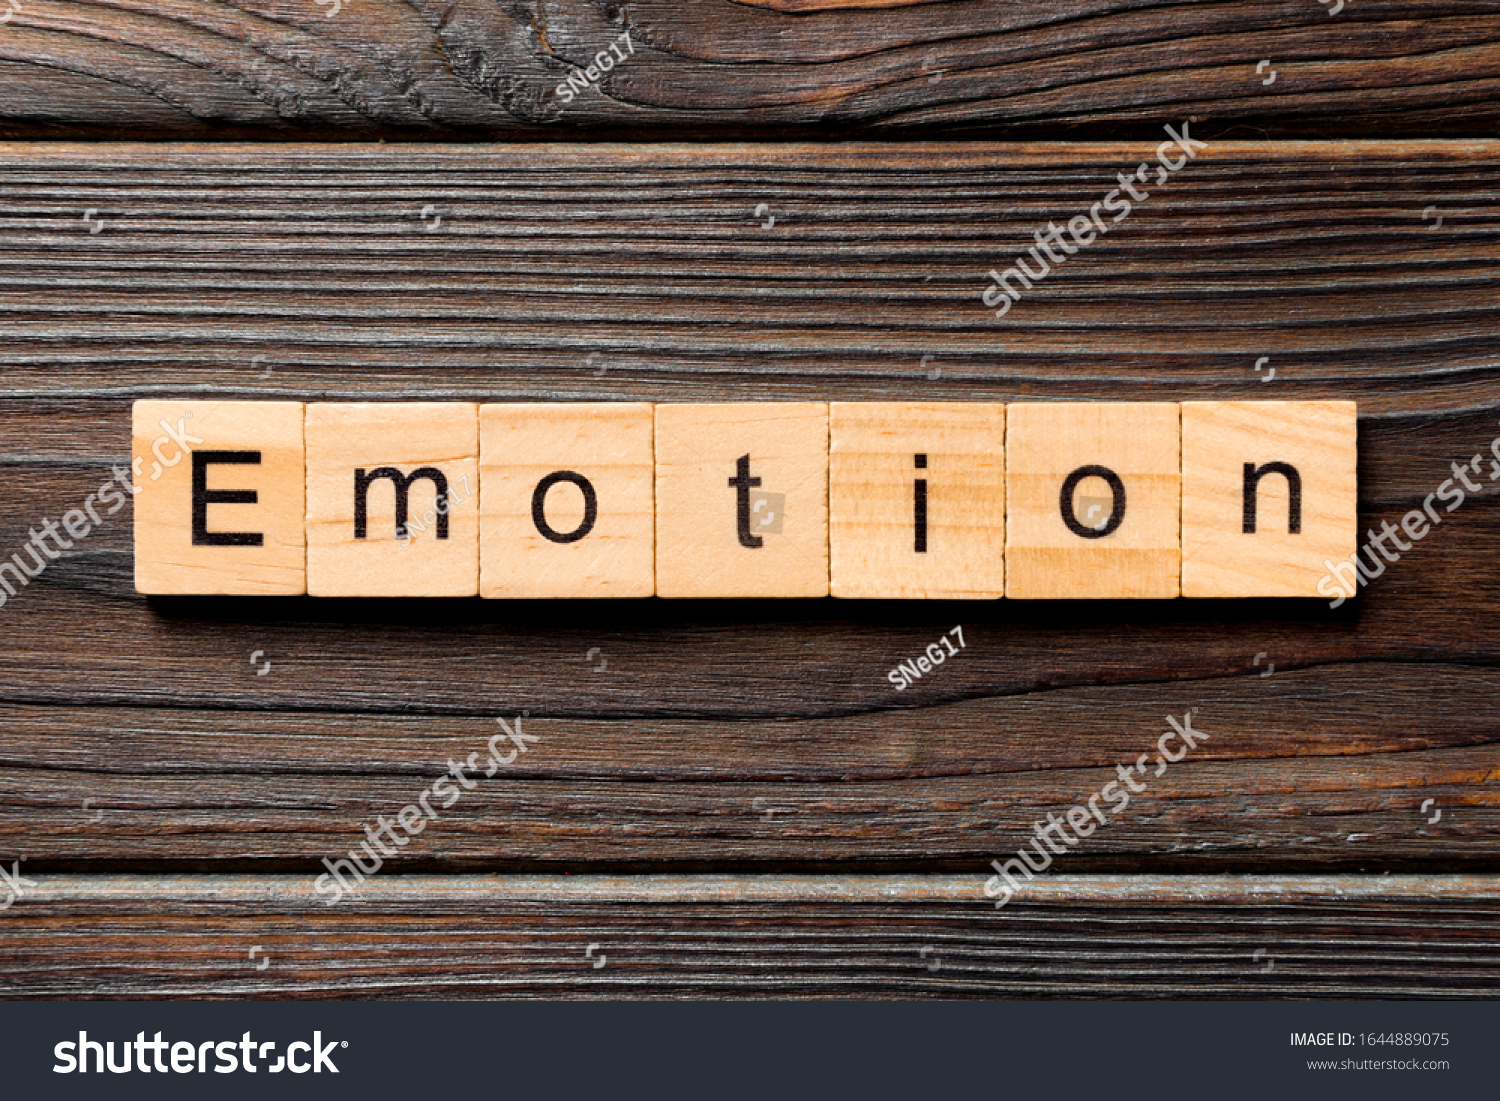 emotion word written on wood block. emotion text on table, concept. #1644889075